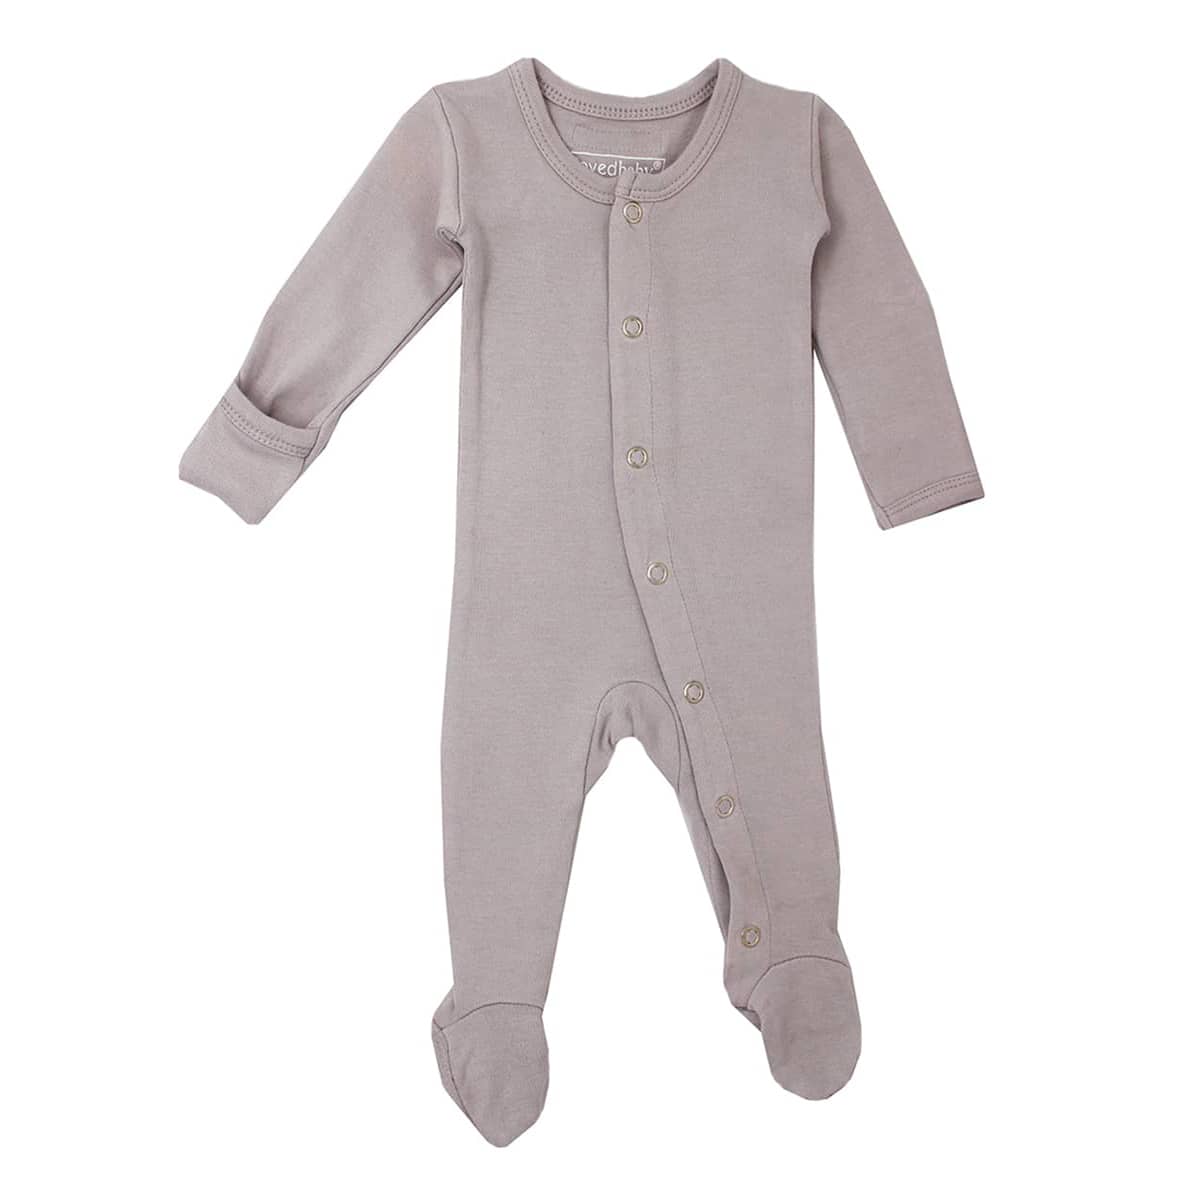 L'ovedbaby Organic Gl'oved Footed Overall - Light Grey